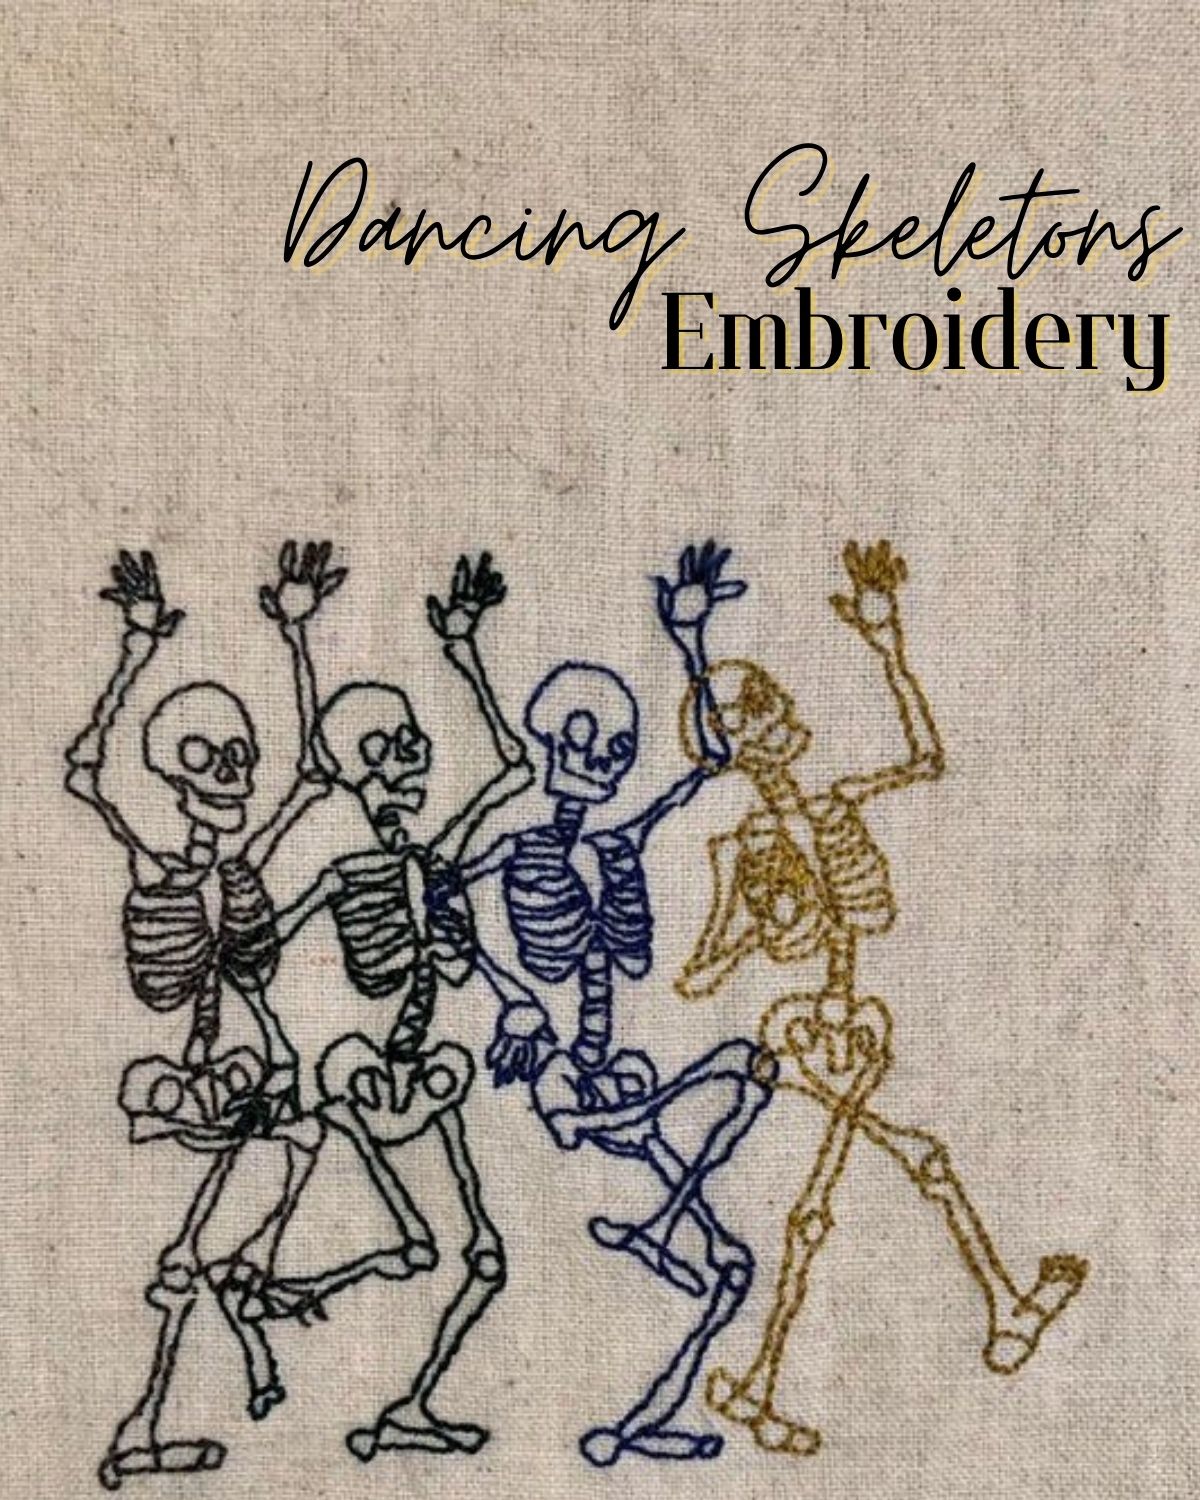 Four skeletons dancing in a line